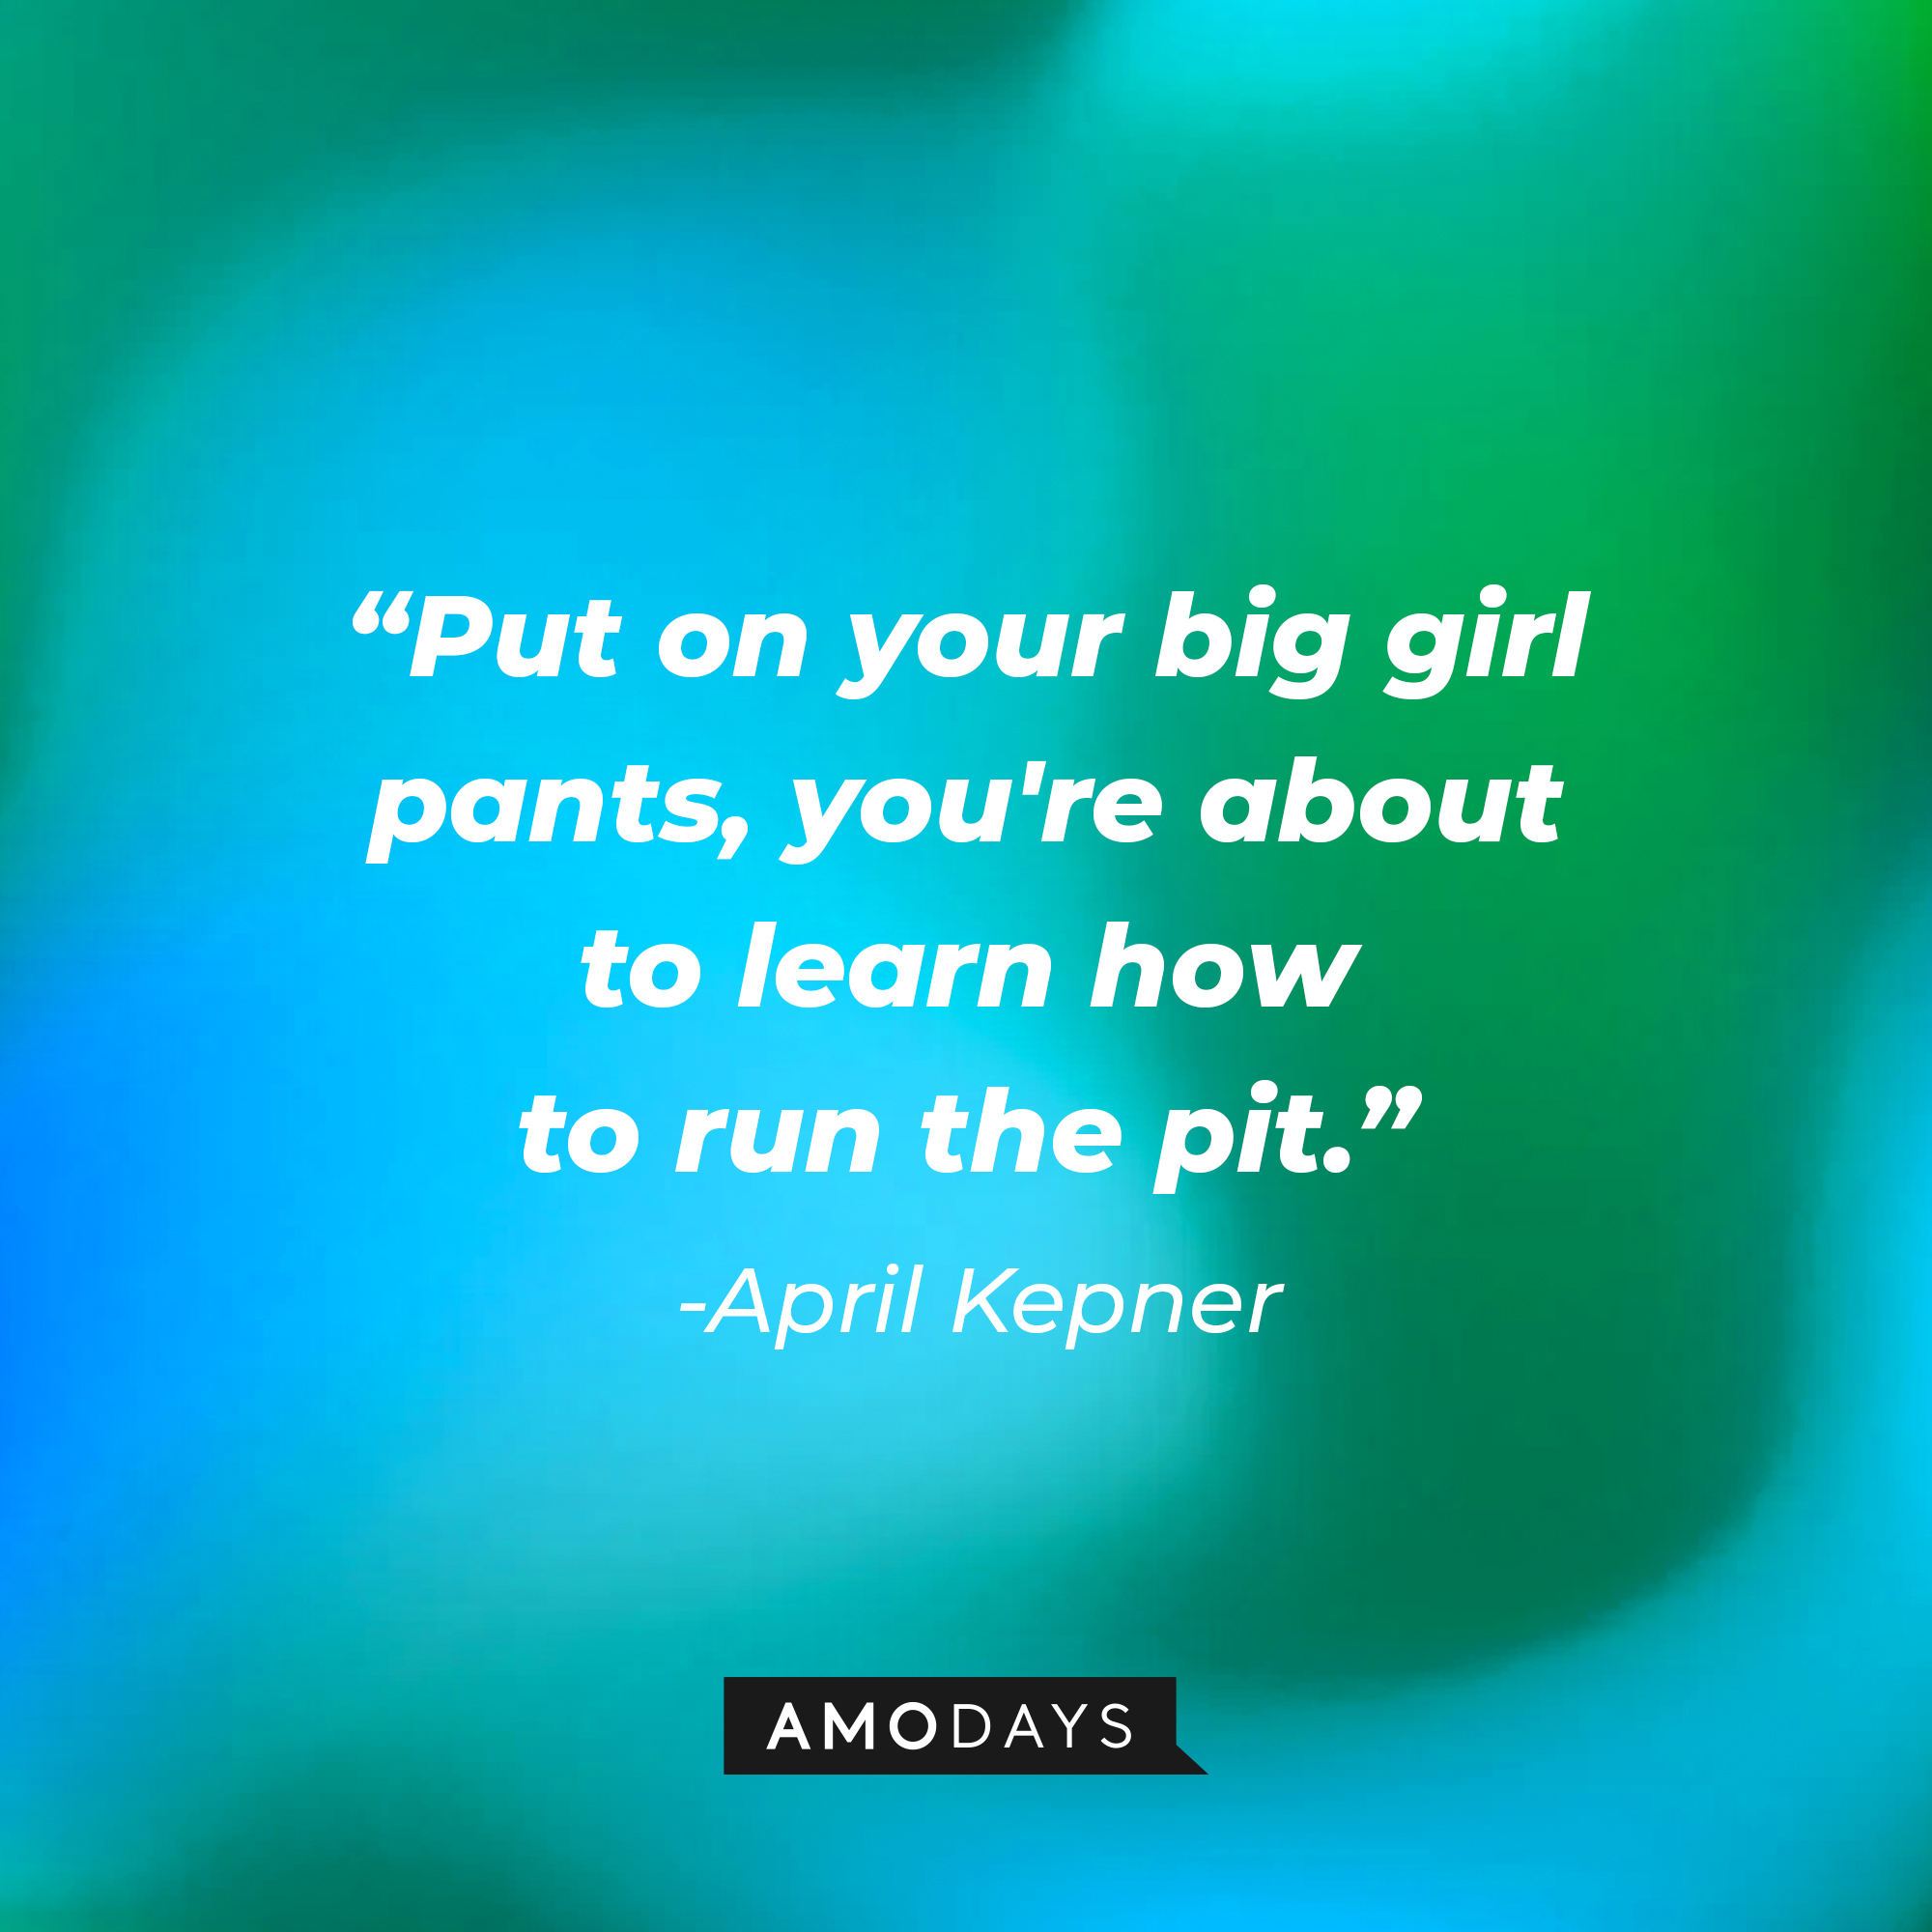 April Kepner's quote: "Put on your big girl pants, you're about to learn how to run the pit." | Source: AmoDays